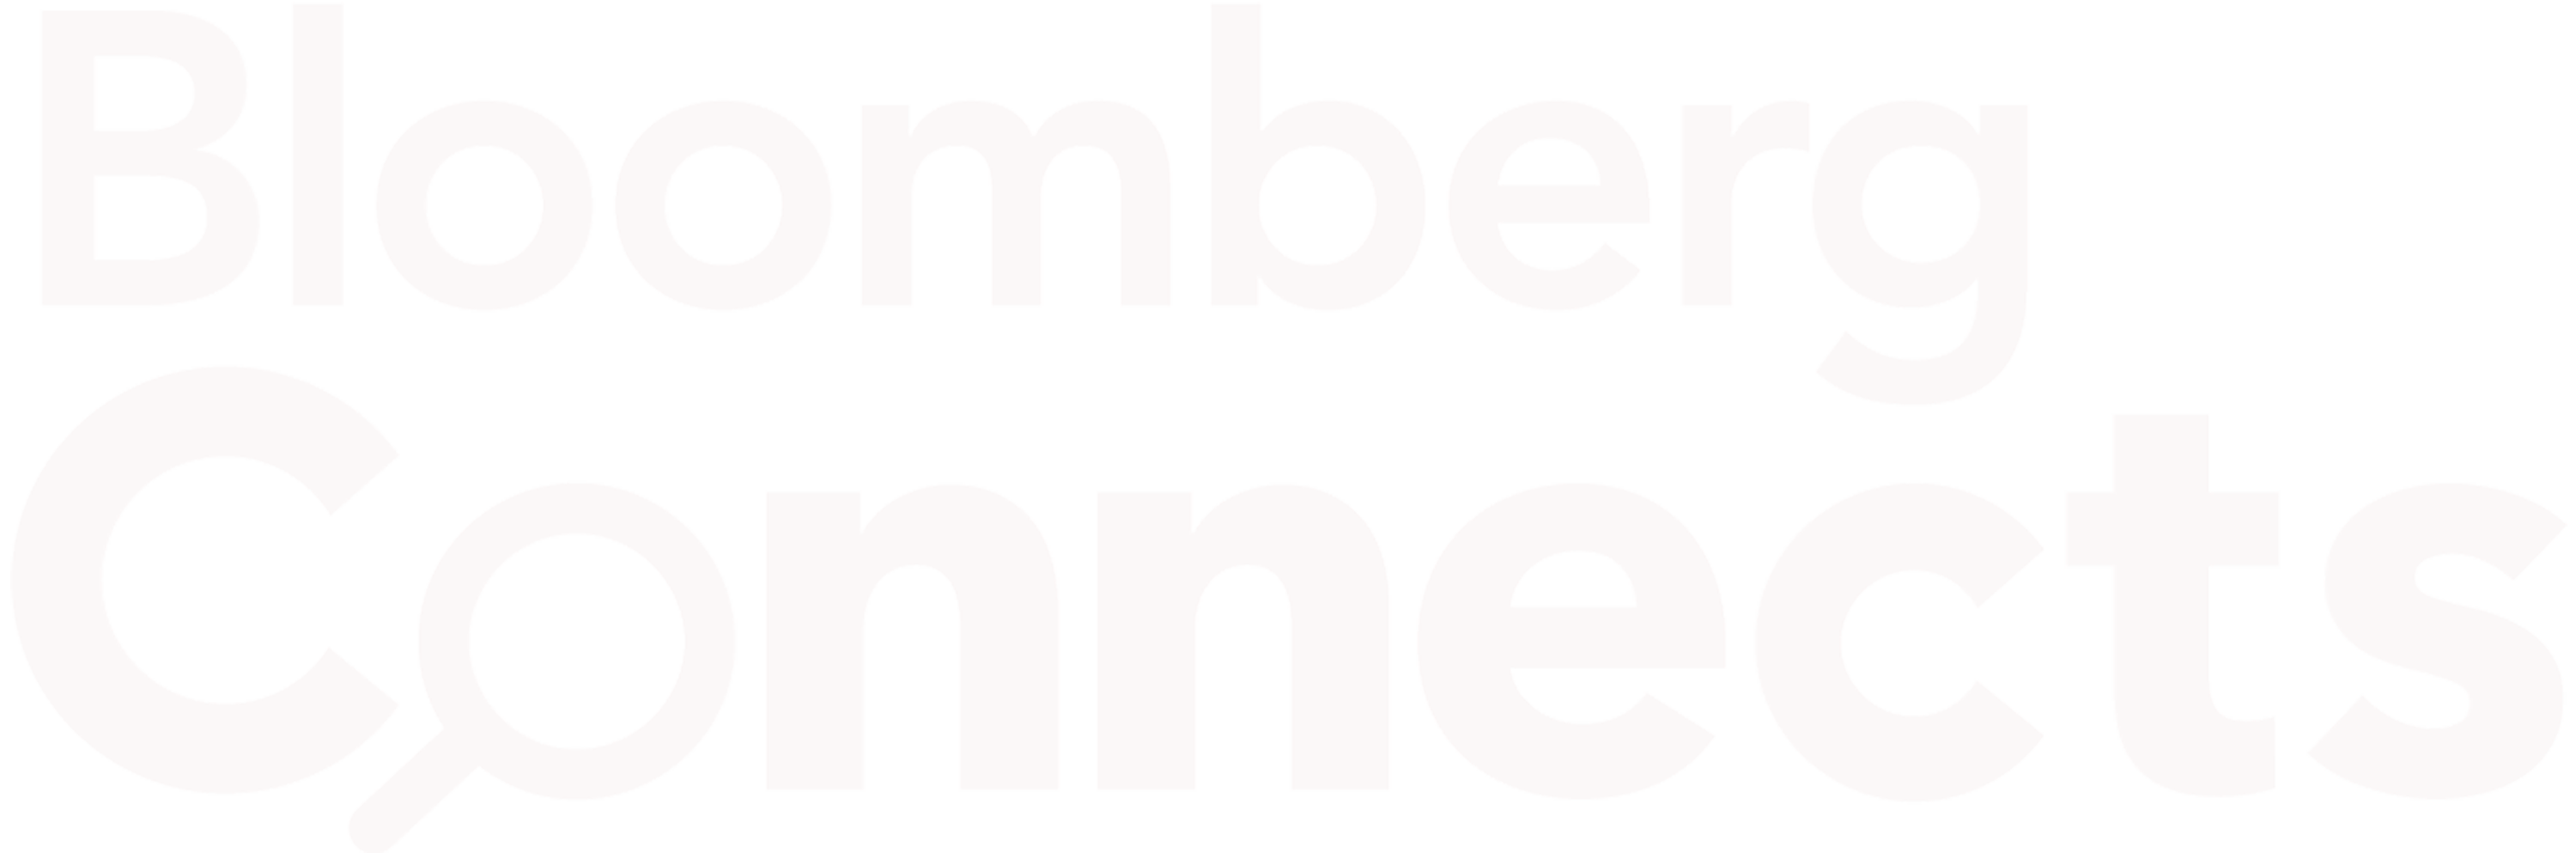 Bloomberg connects logo